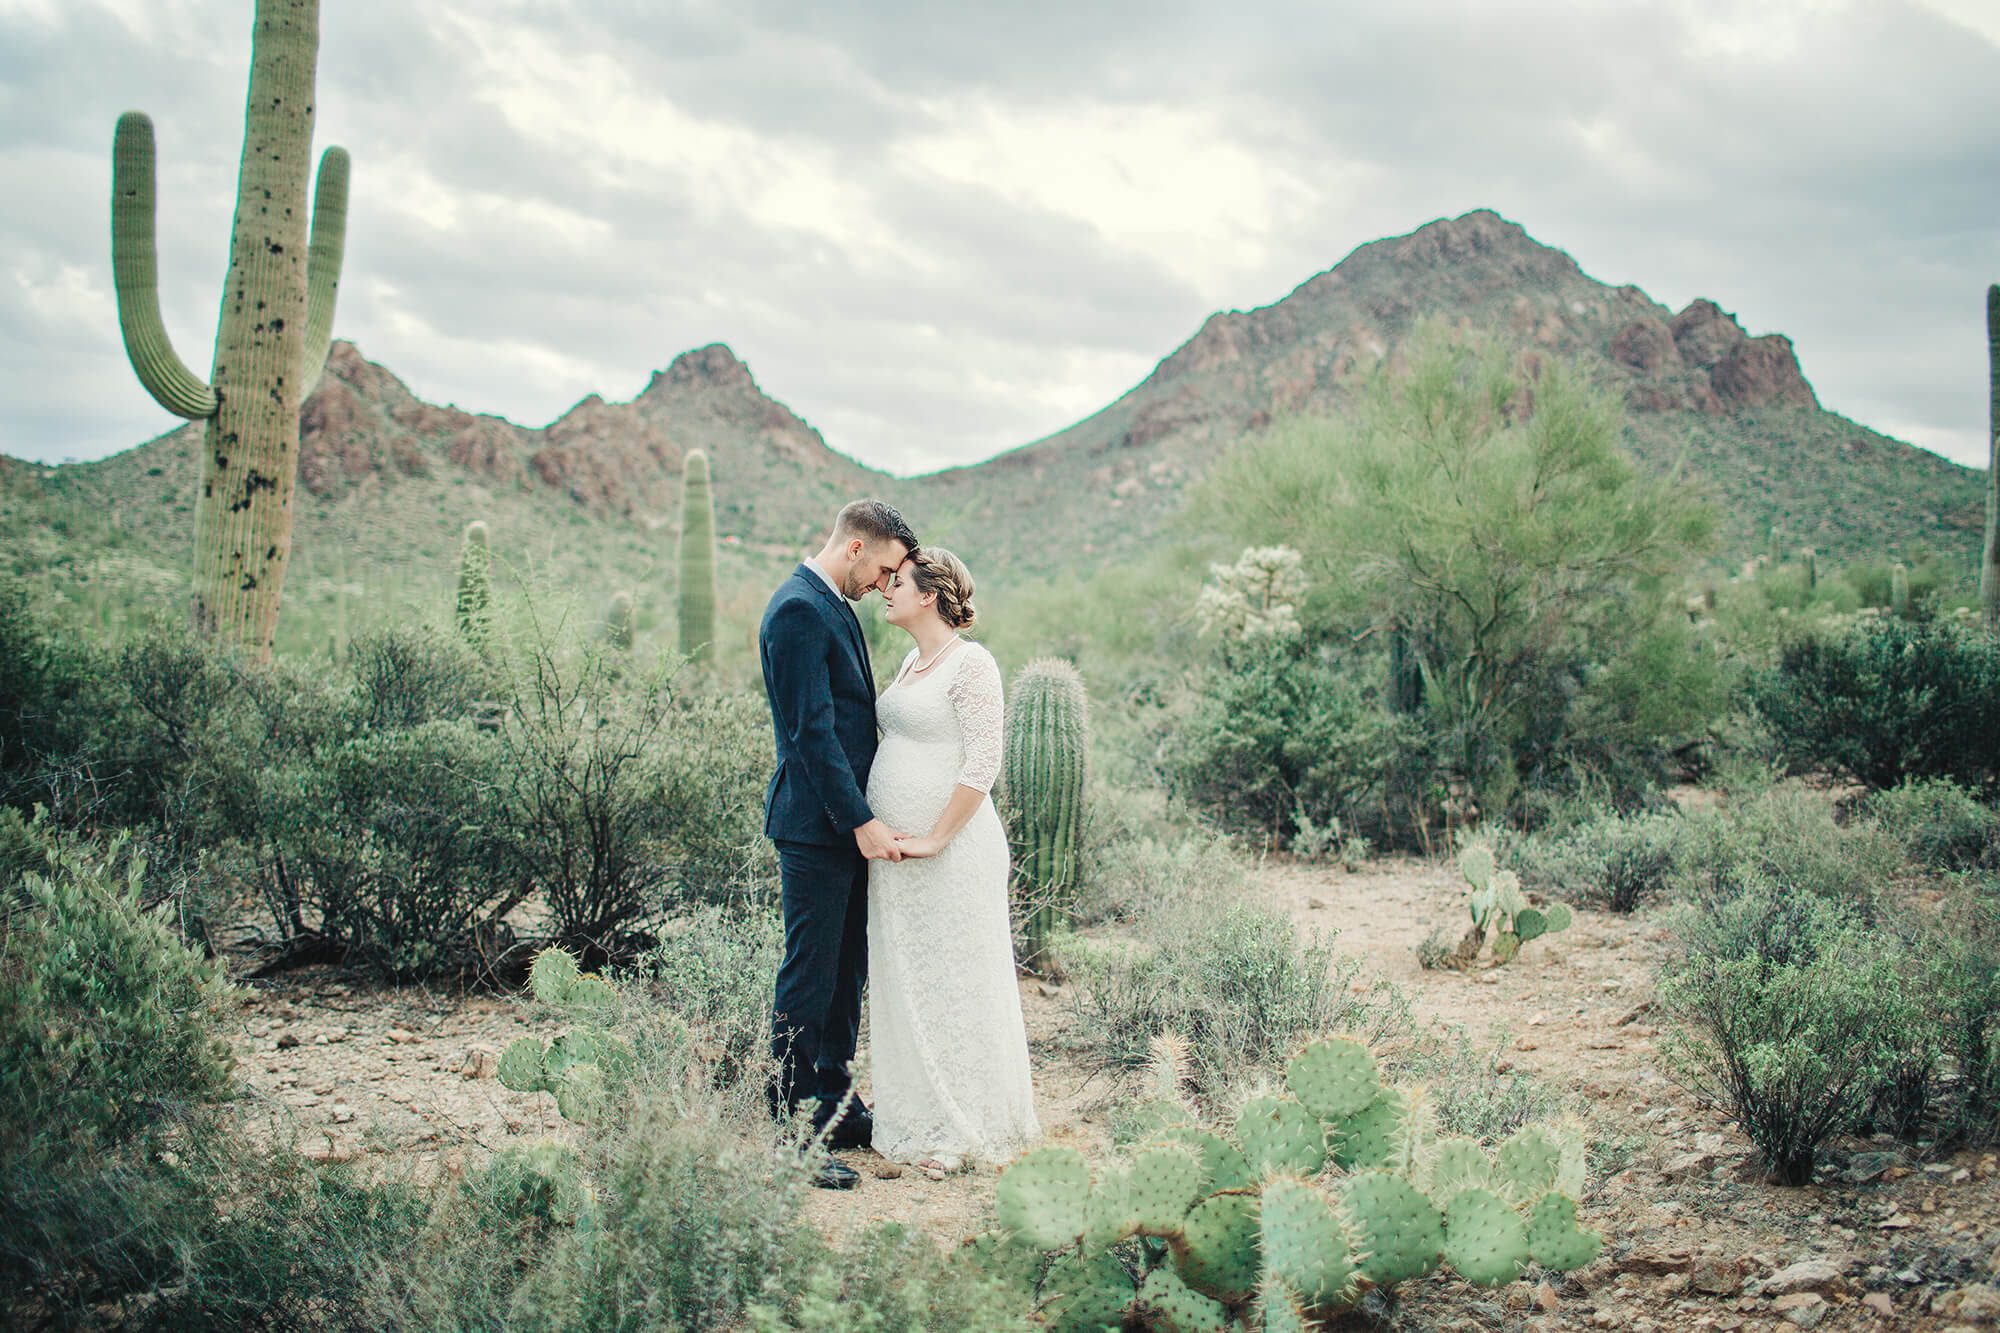 The peaks of Gates Pass for Amanda and Kenneth during their elopement session.